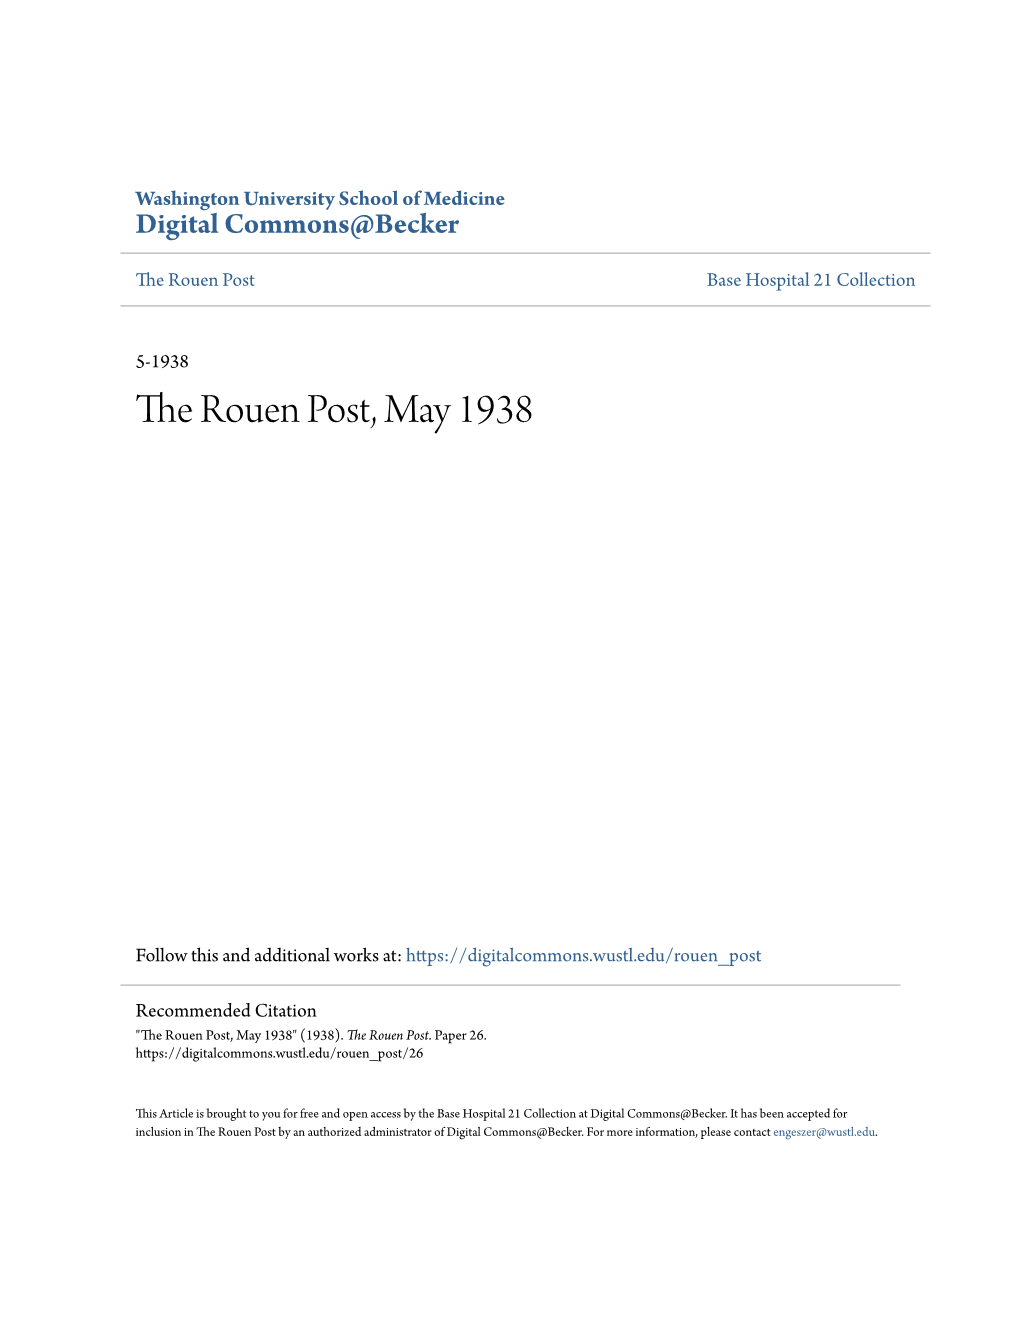 The Rouen Post, May 1938